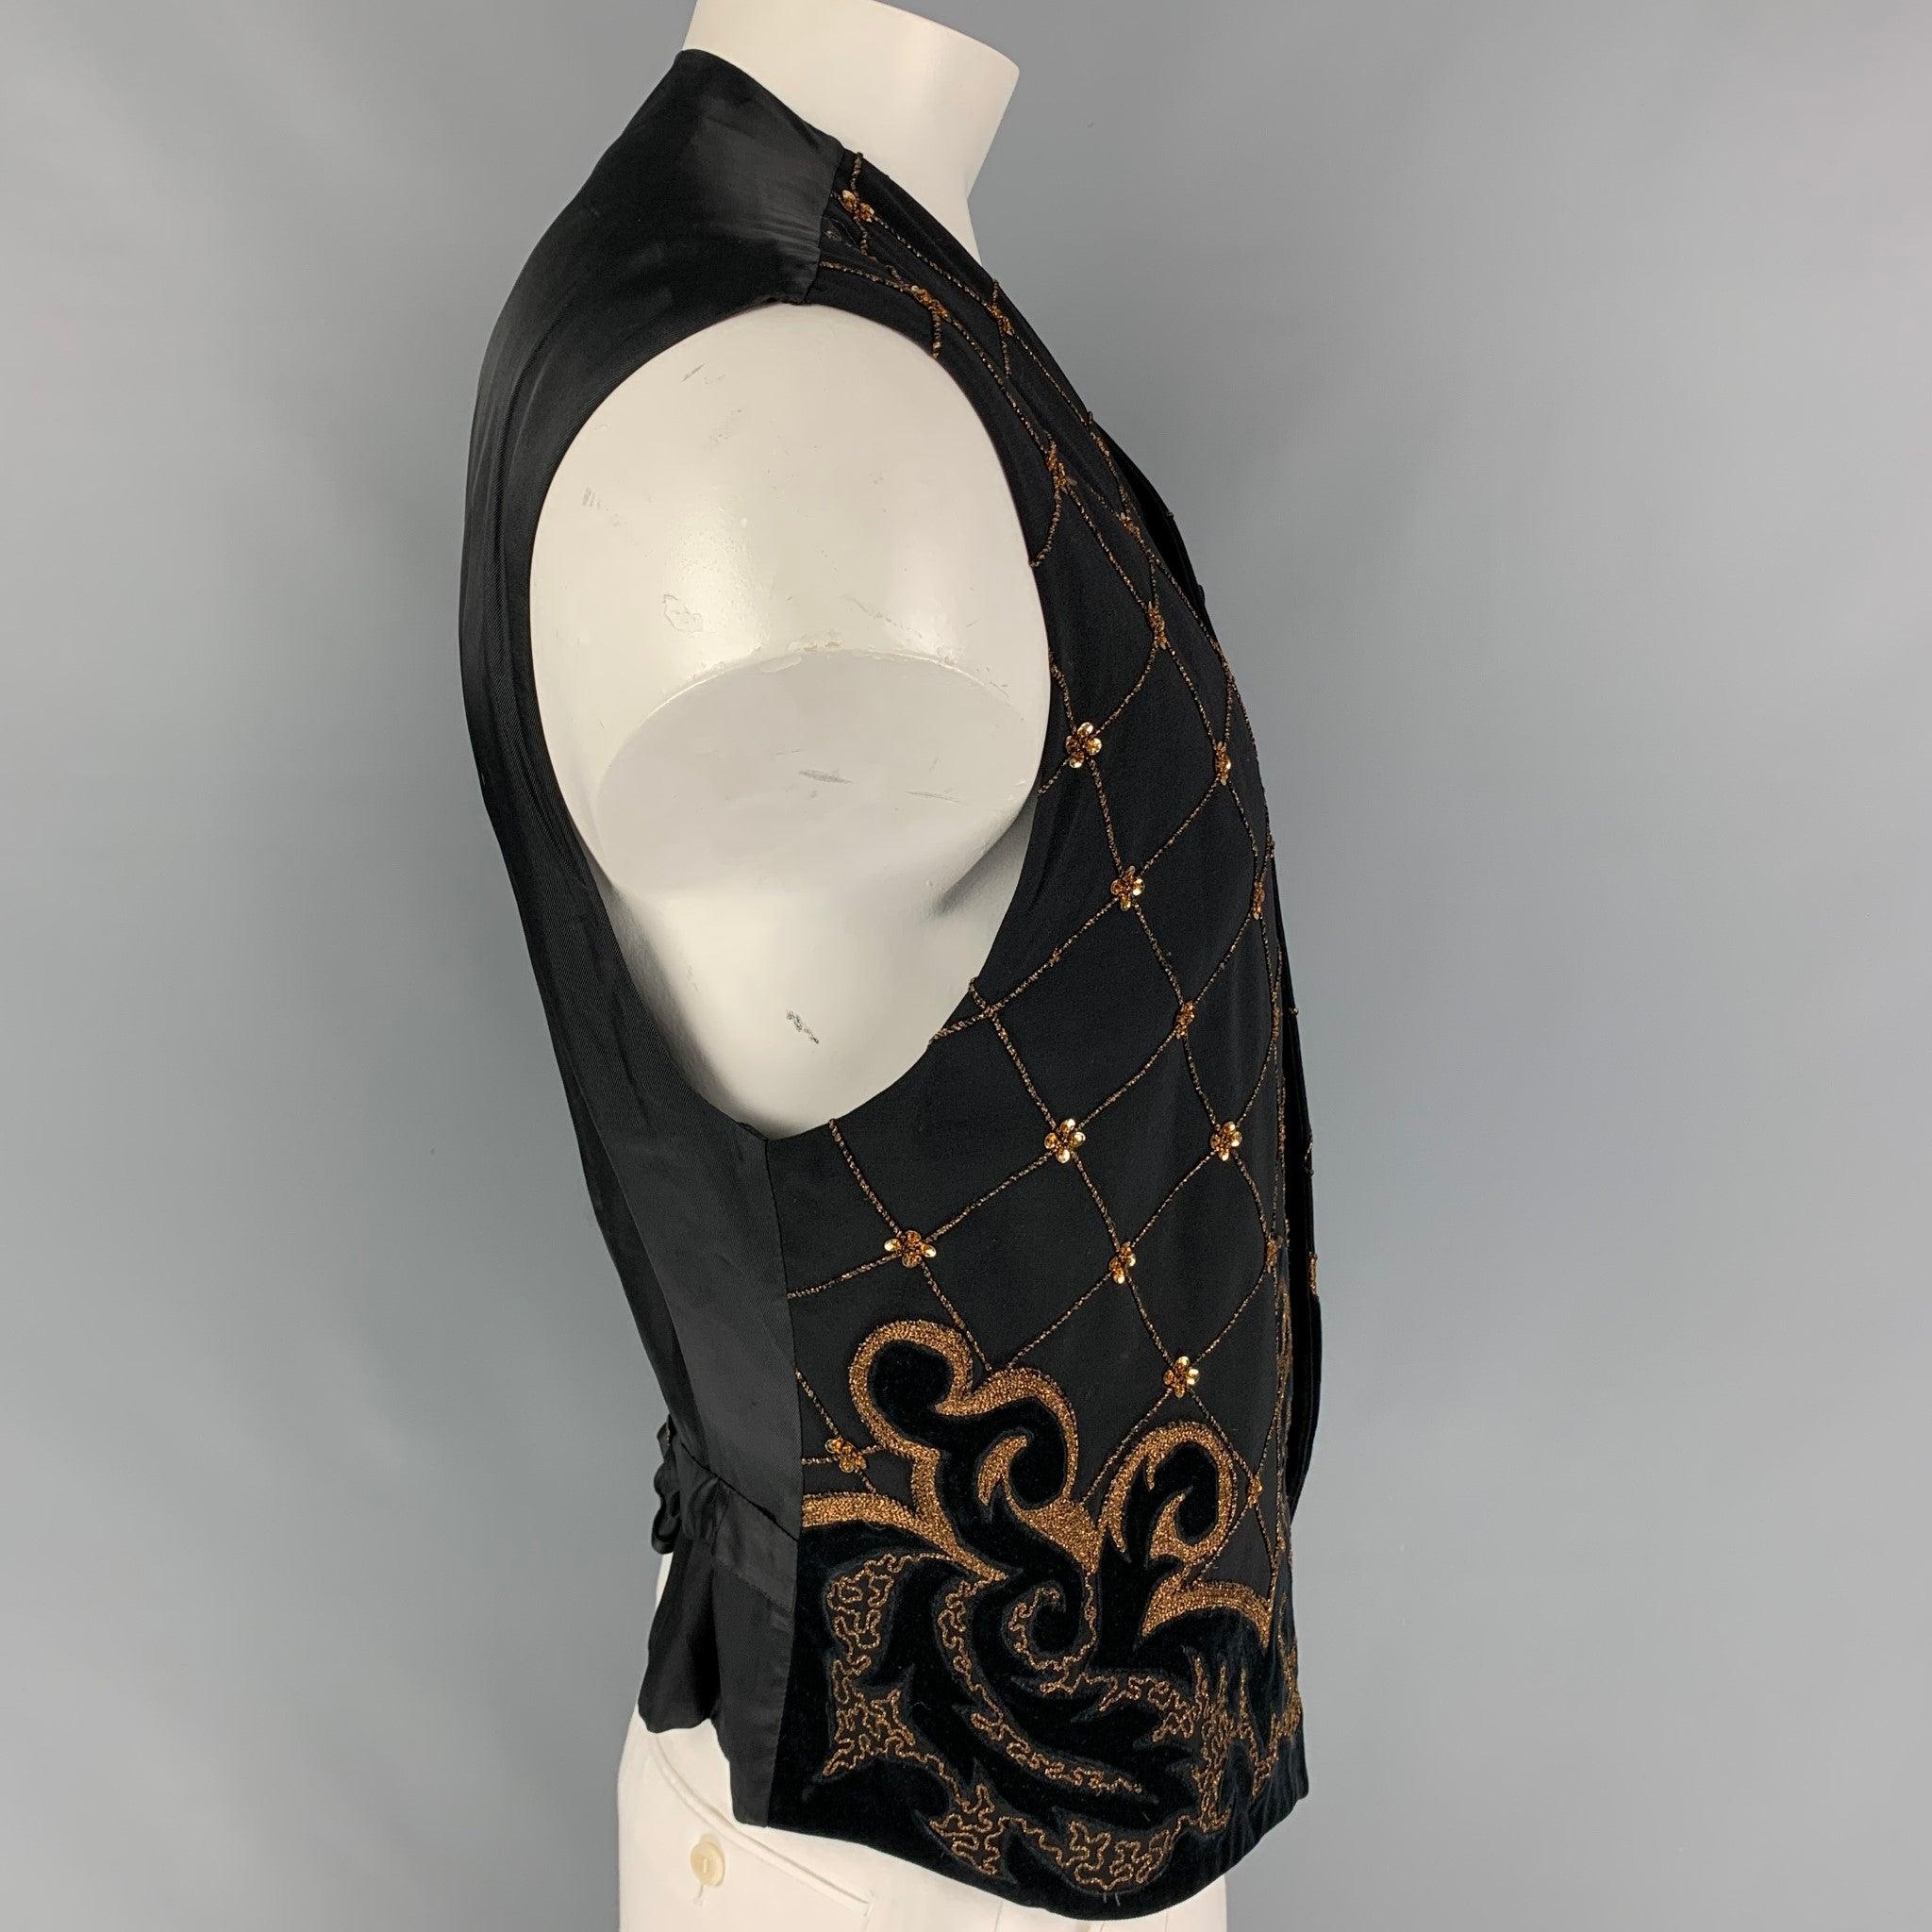 Vintage BYBLOS vest comes in a black wool featuring gold embroidered designs, velvet trim, back belt strap, and a buttoned closure. Made in Italy.
Very Good
Pre-Owned Condition. 

Marked:   52 

Measurements: 
 
Shoulder: 19.5 inches  Chest: 42